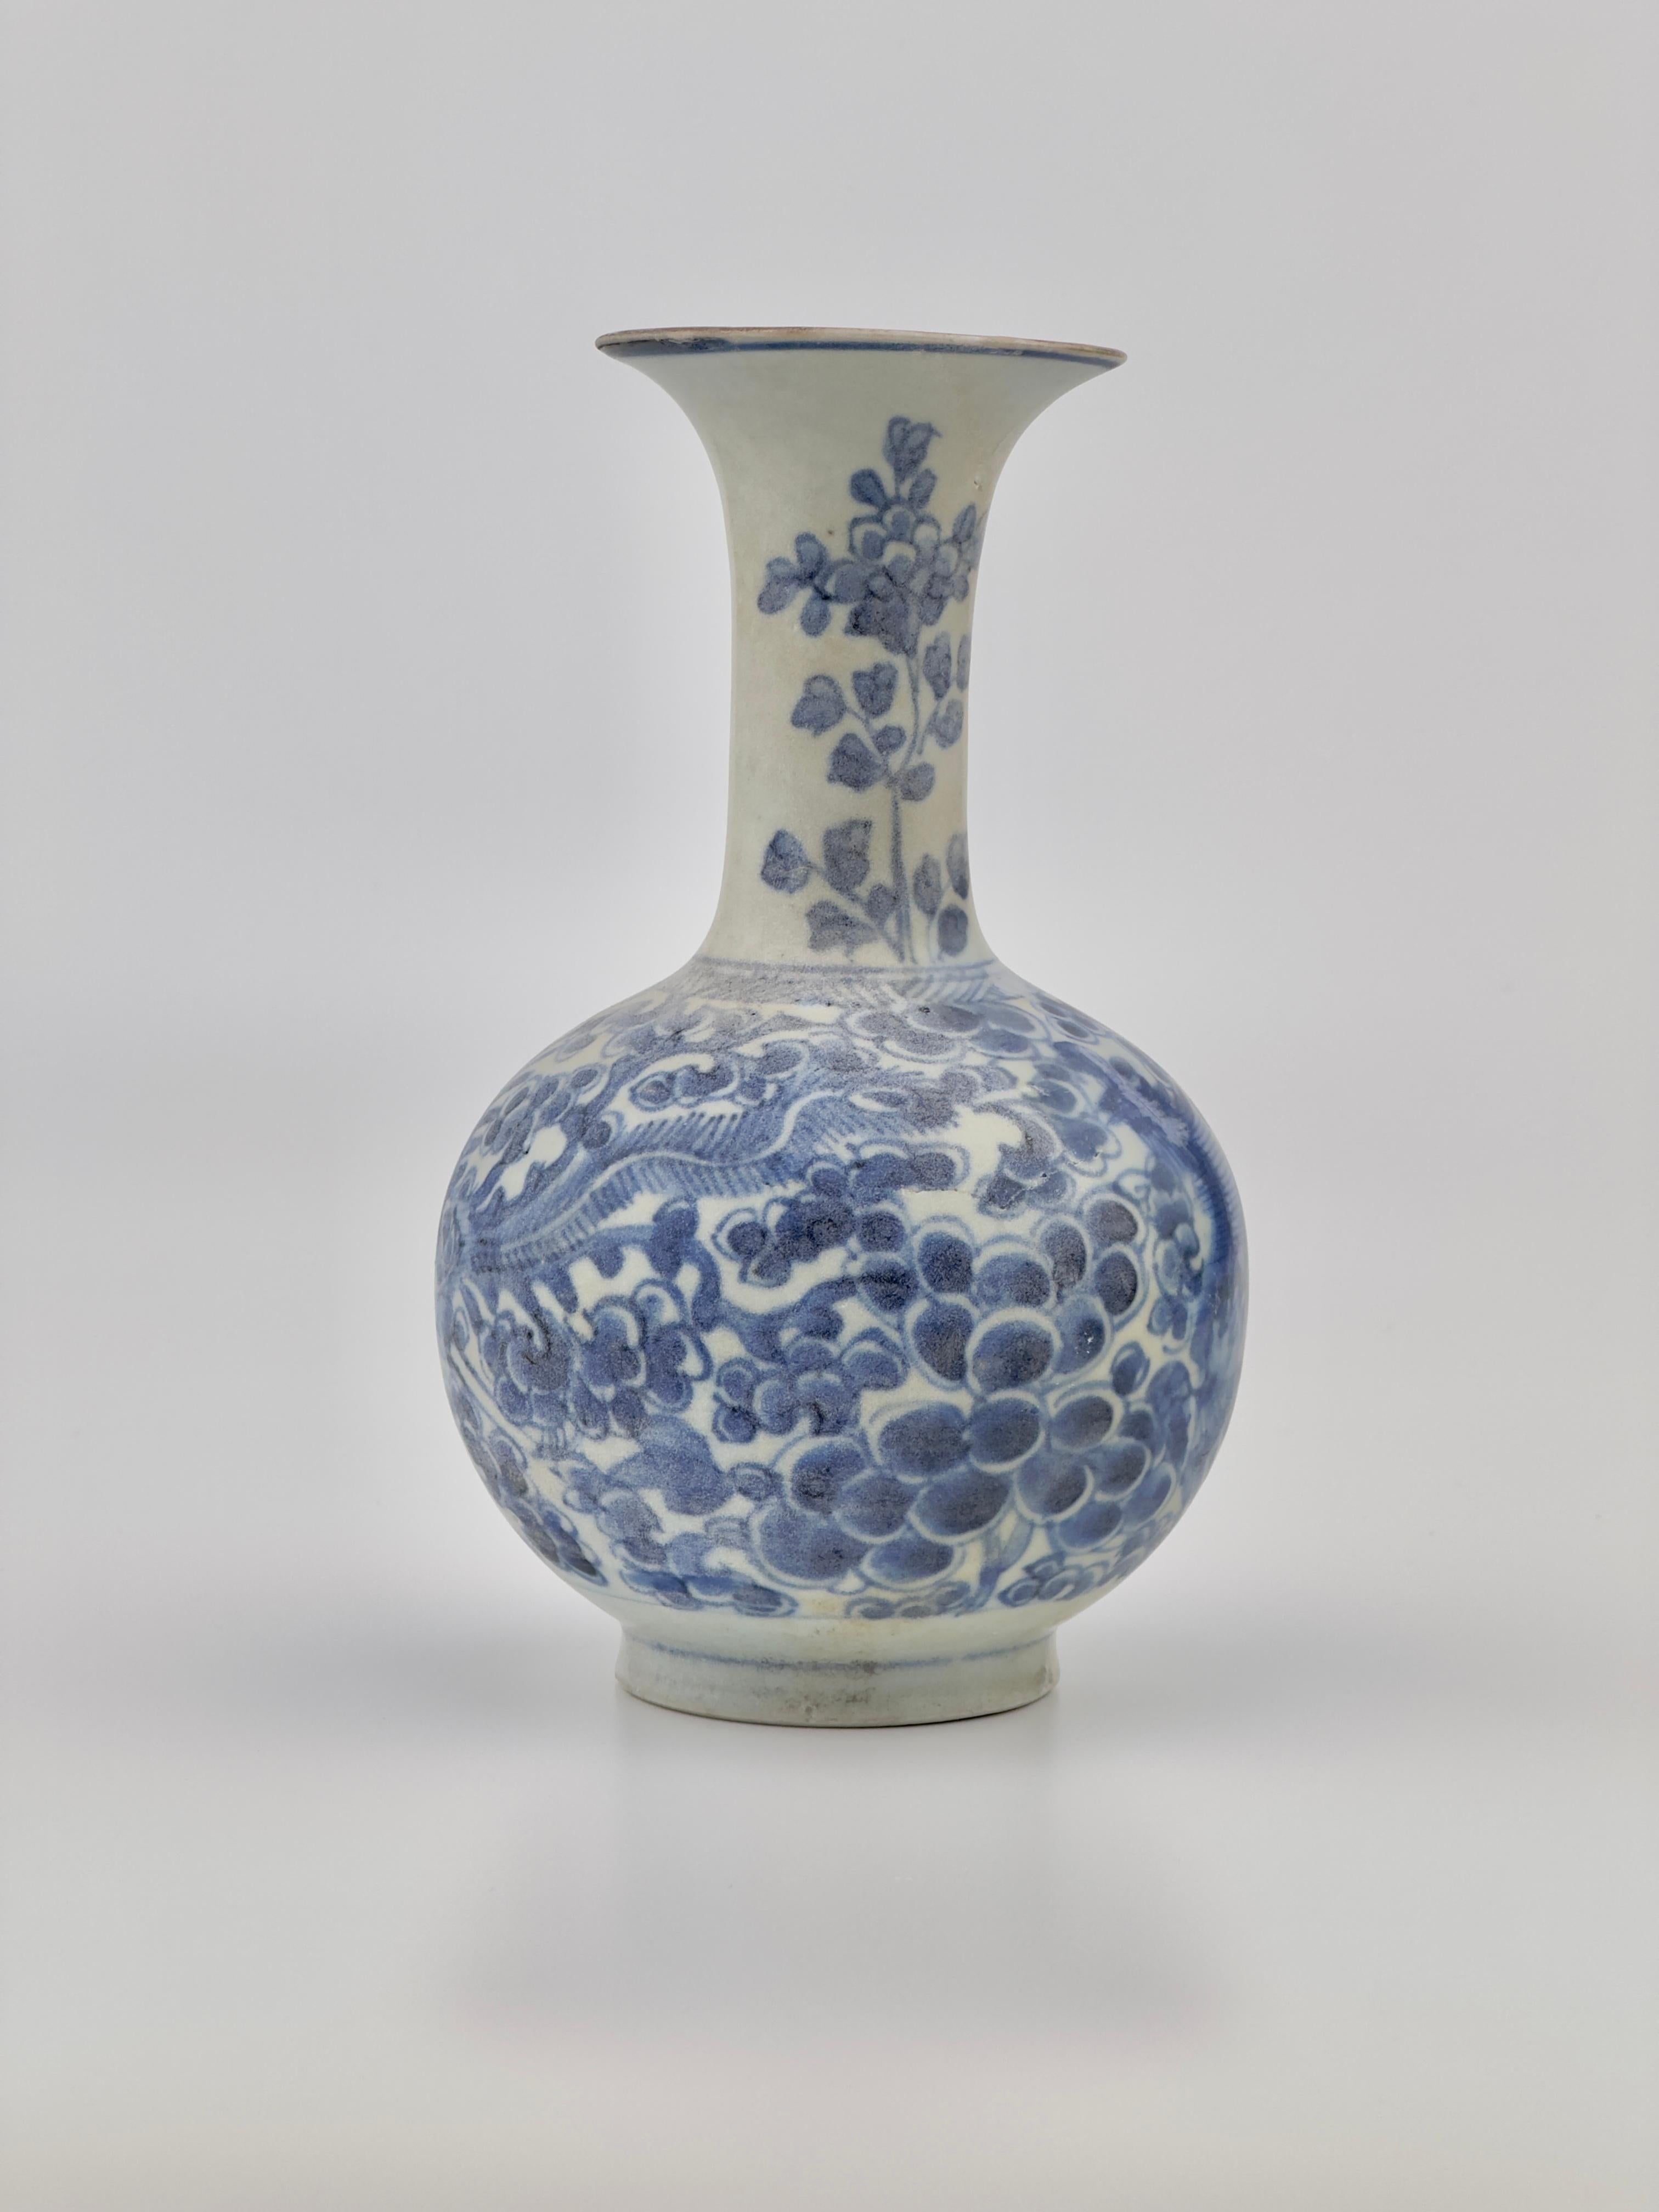 The Kendi is decorated with cobalt blue underglaze depicting flowers and a mythical bird, reflecting the artistic finesse and symbolic expressions of the era. These designs often carry symbolic meanings, with birds sometimes representing immortality